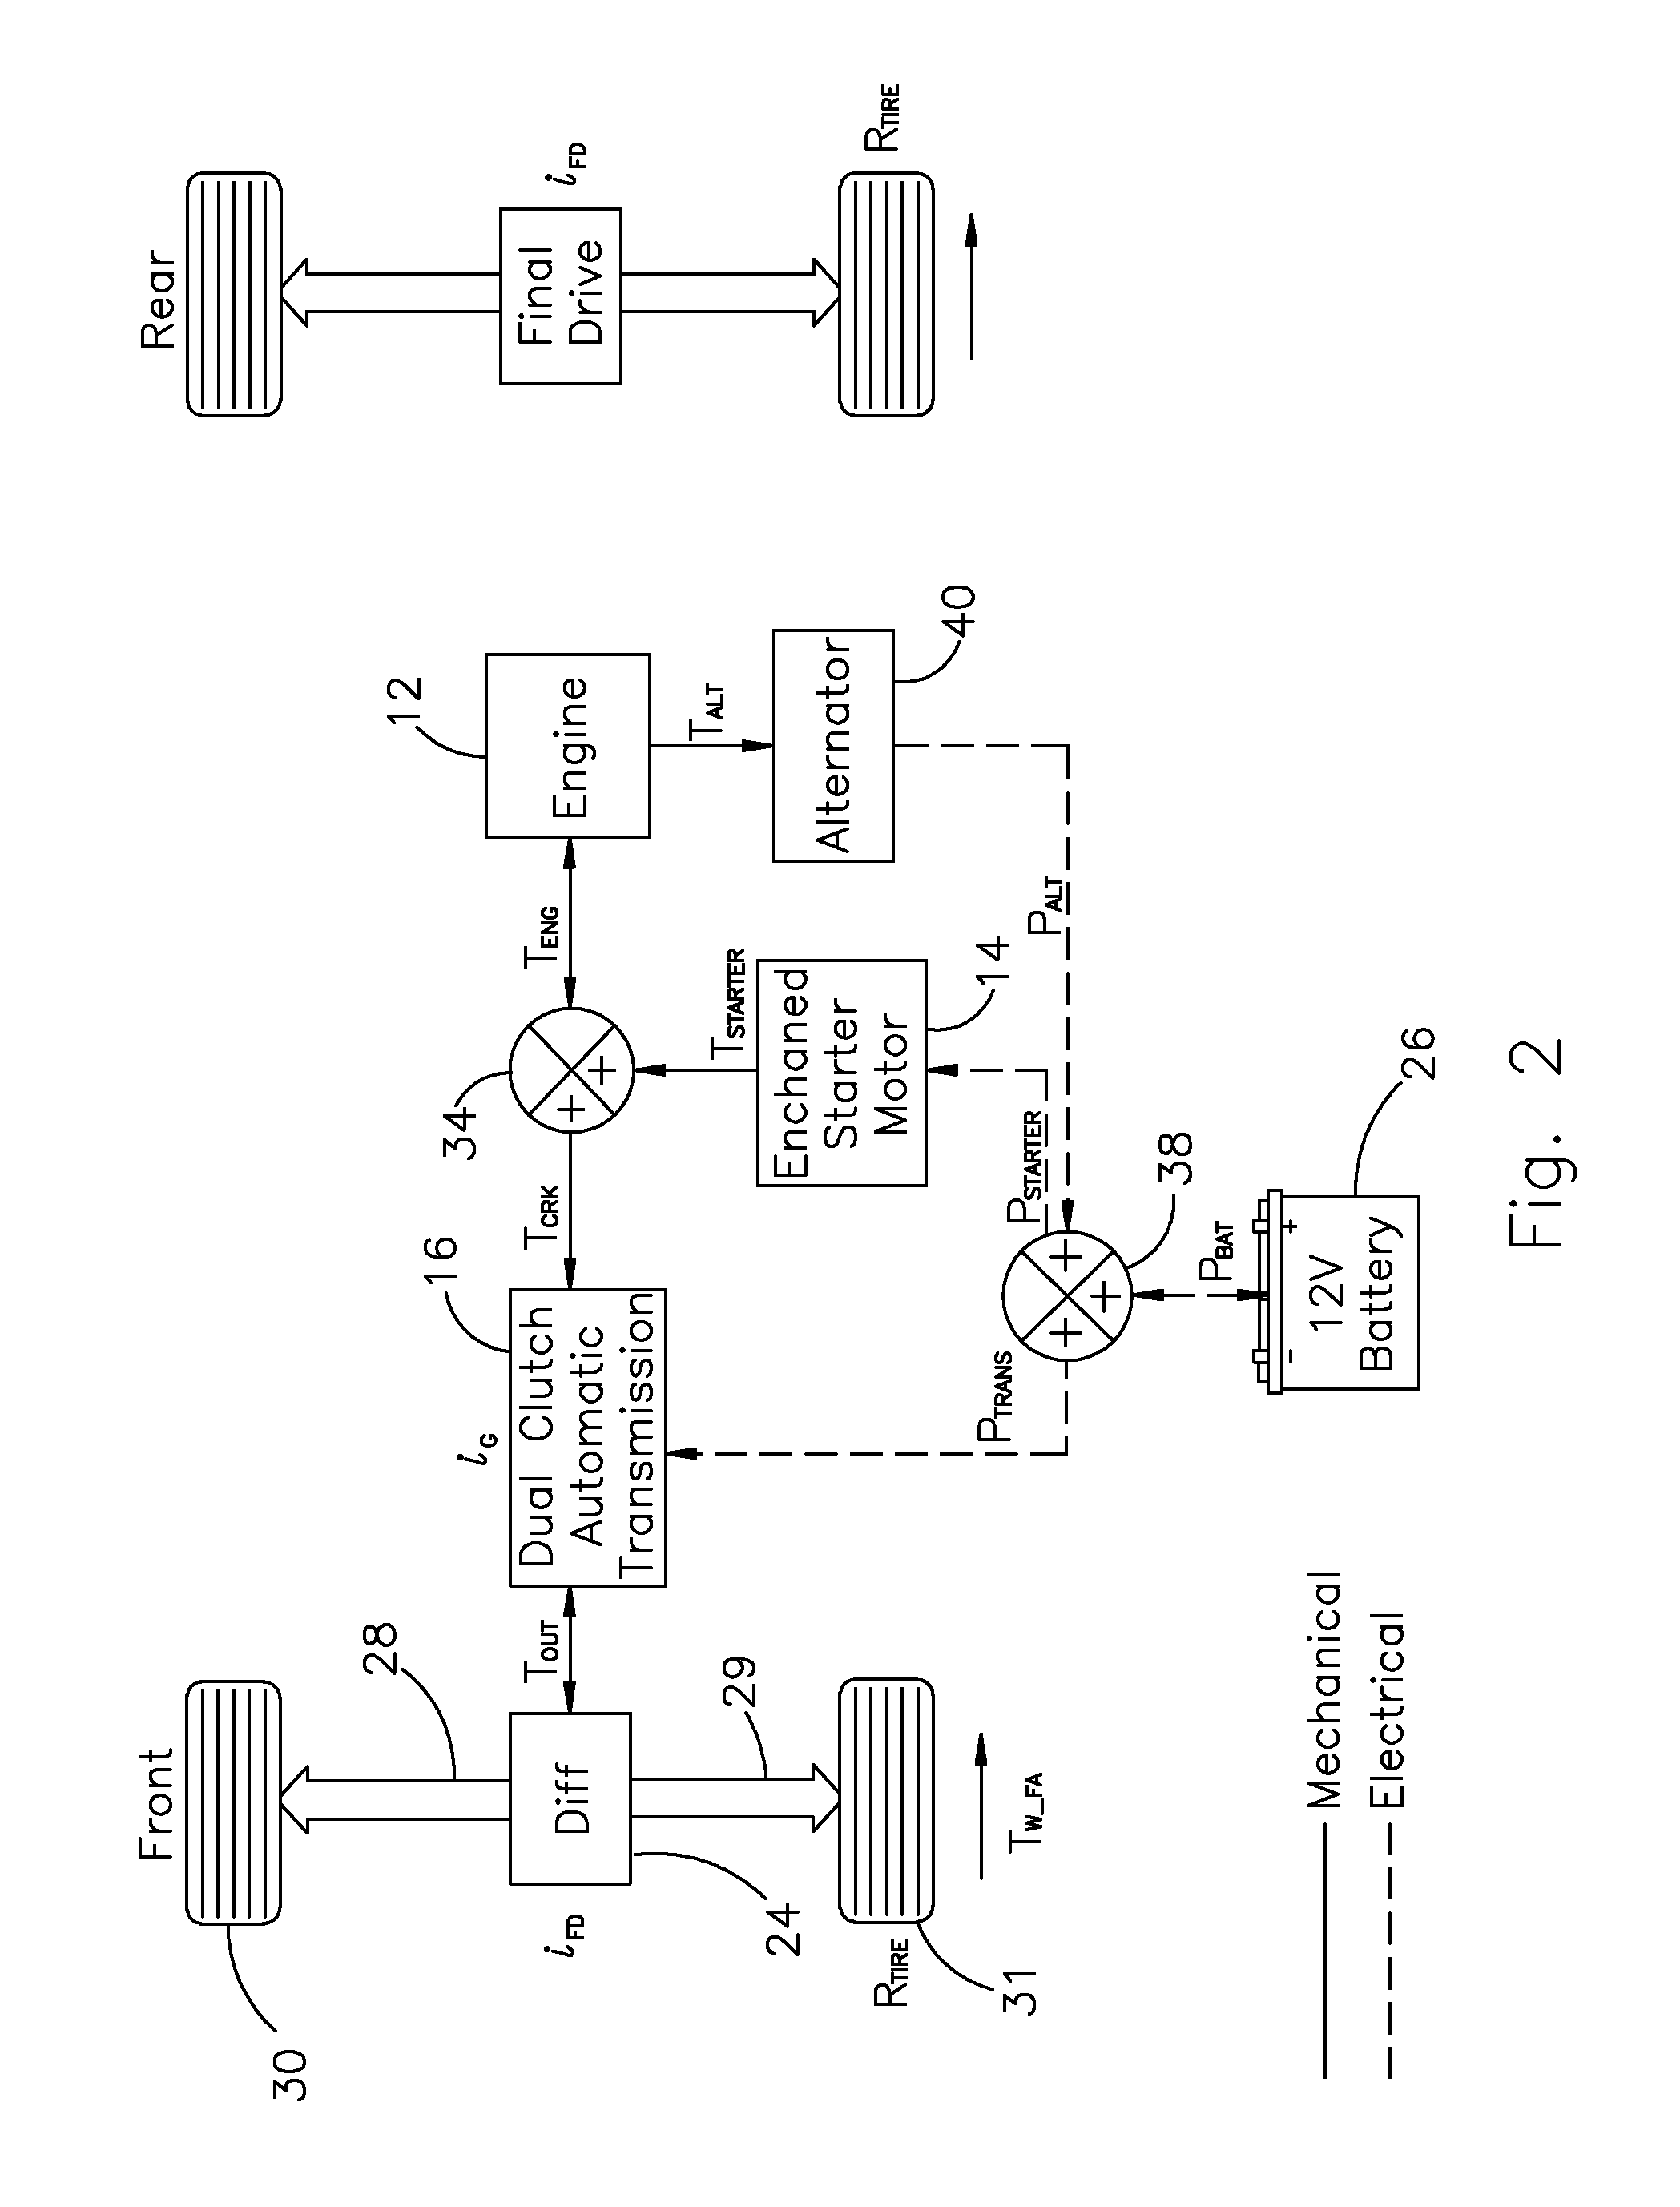 Control of a Dry, Dual-Clutch Transmission During an Engine Restart of a Hybrid Electric Vehicle